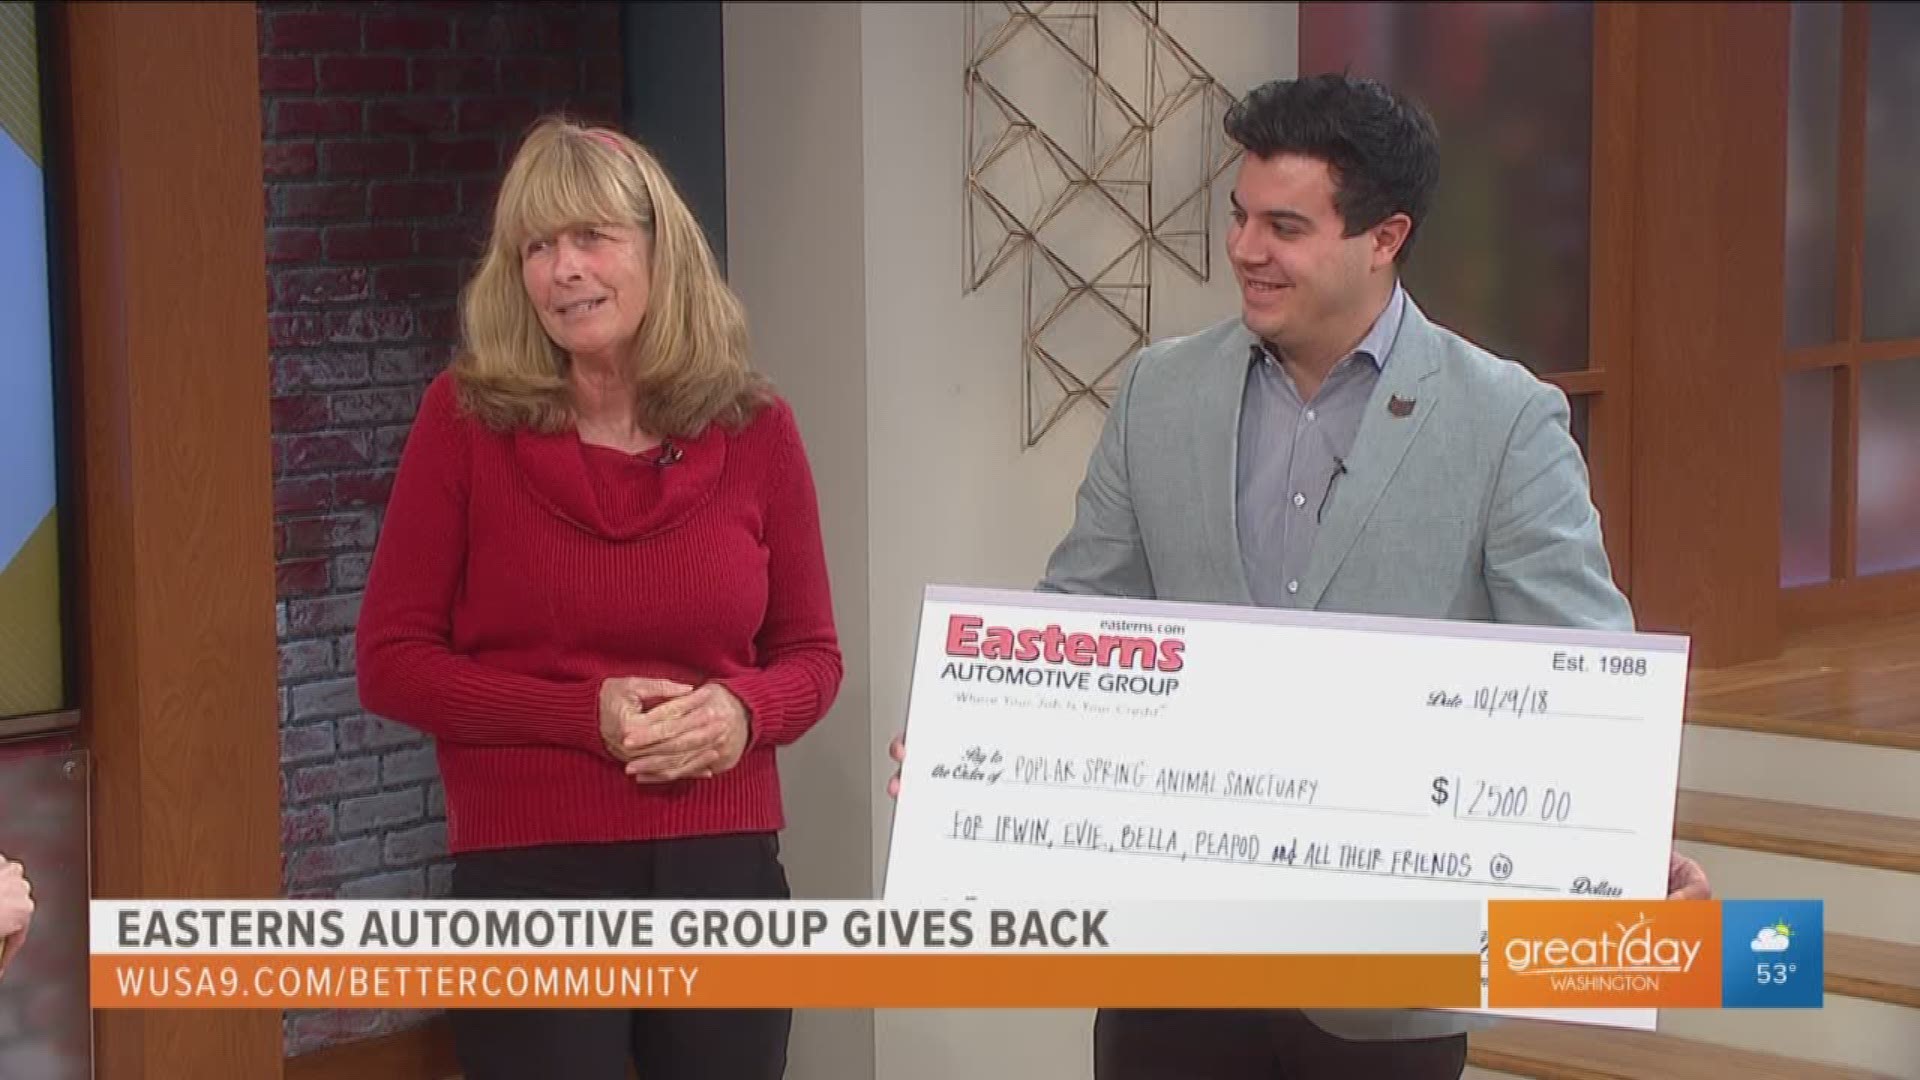 Joel Bassam of Easterns Automotive Group presented Terri Cummings of Poplar Spring Animal Sanctuary with a $2,500 check to help farm animals and wildlife in Poolesville, Maryland. If you want to learn more about Easterns Automotive Group and how they give